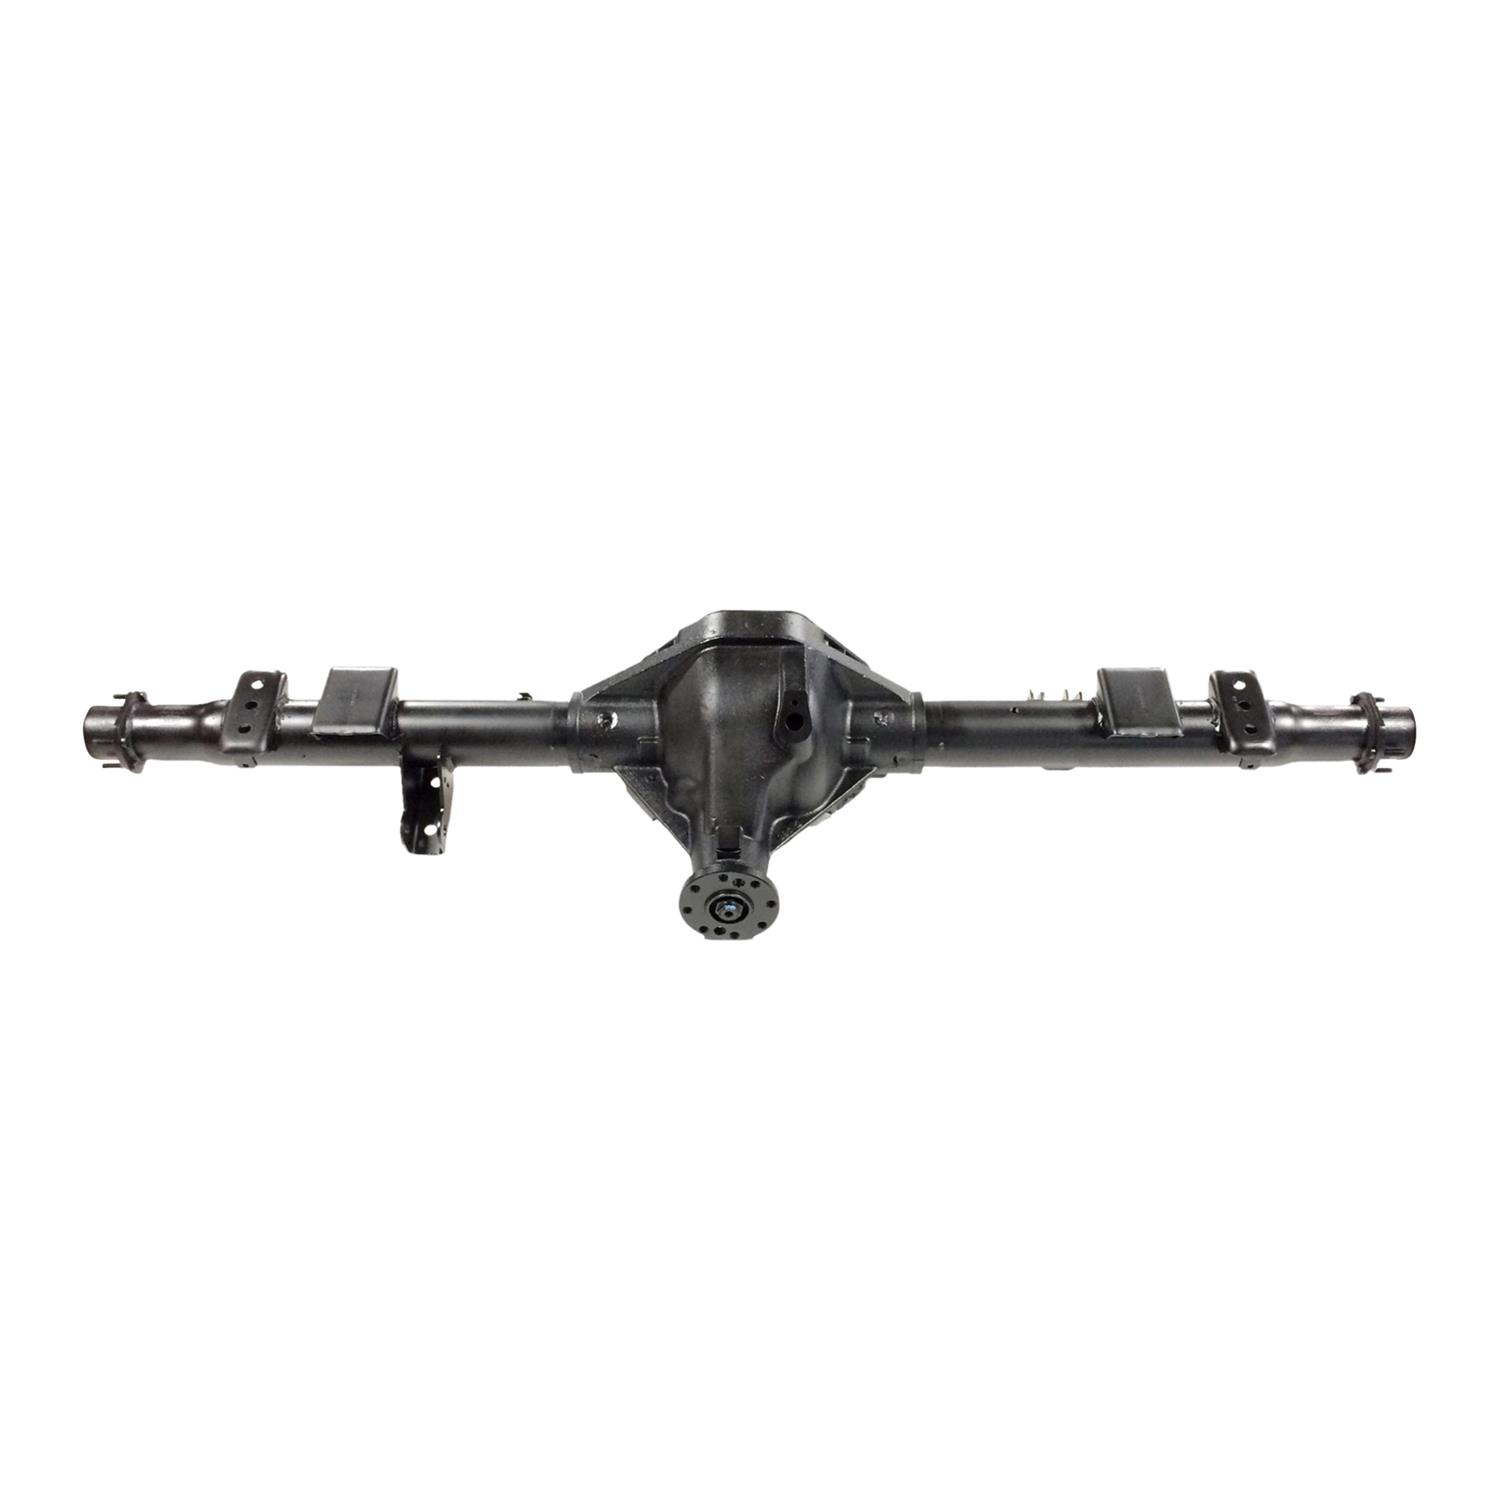 Remanufactured Chrysler 9.25 Rear Open Axle 3.55 Gears 2WD